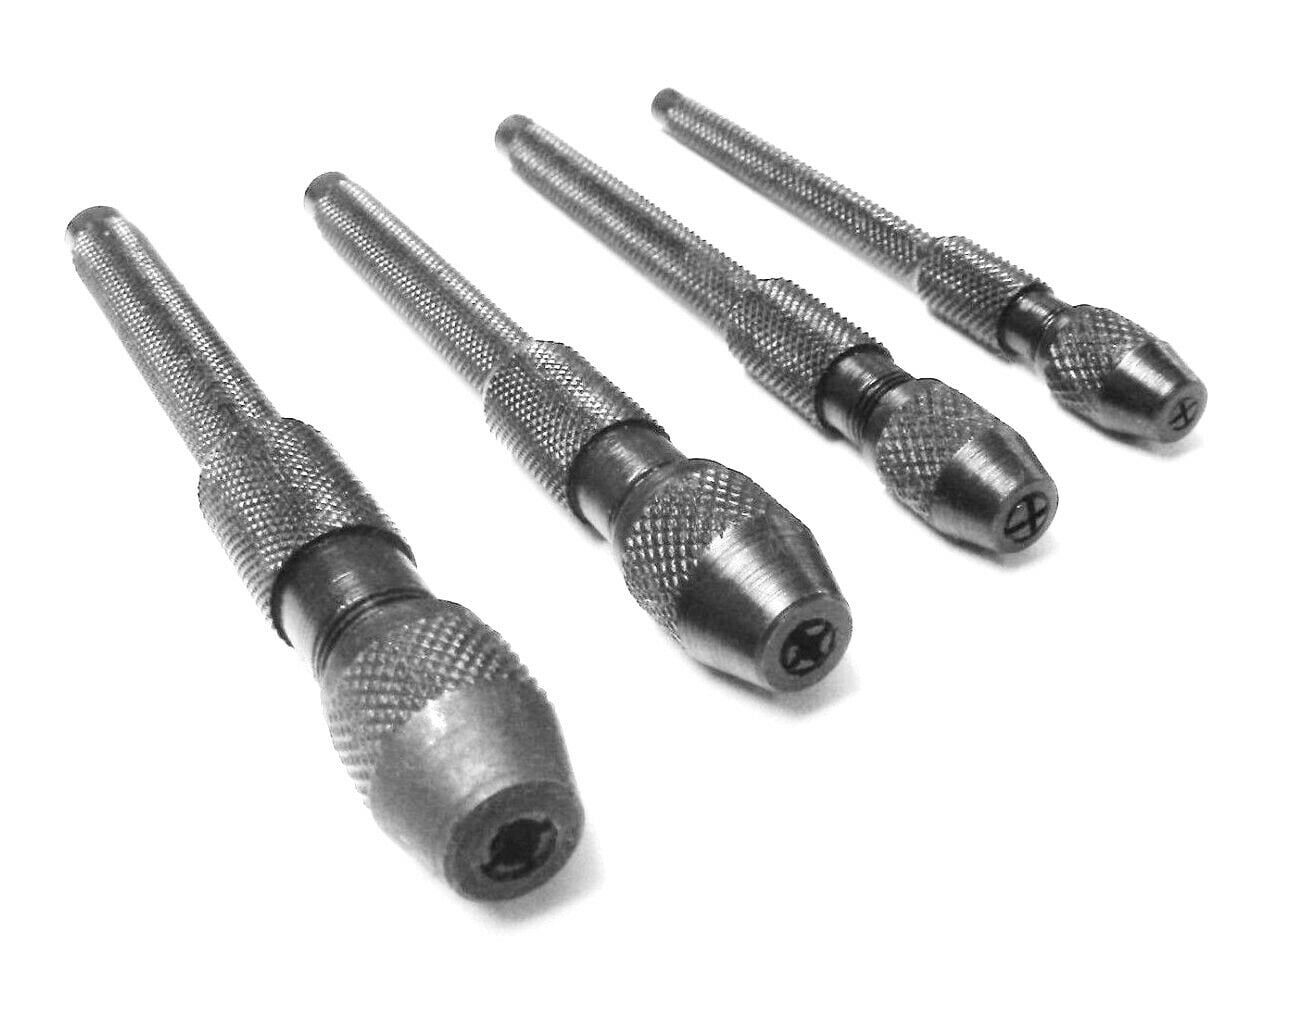 Details about   4 Piece Pin Vise Set Handheld 4 Sizes Chucks Drilling Vice Jewelry Hobby Crafts 